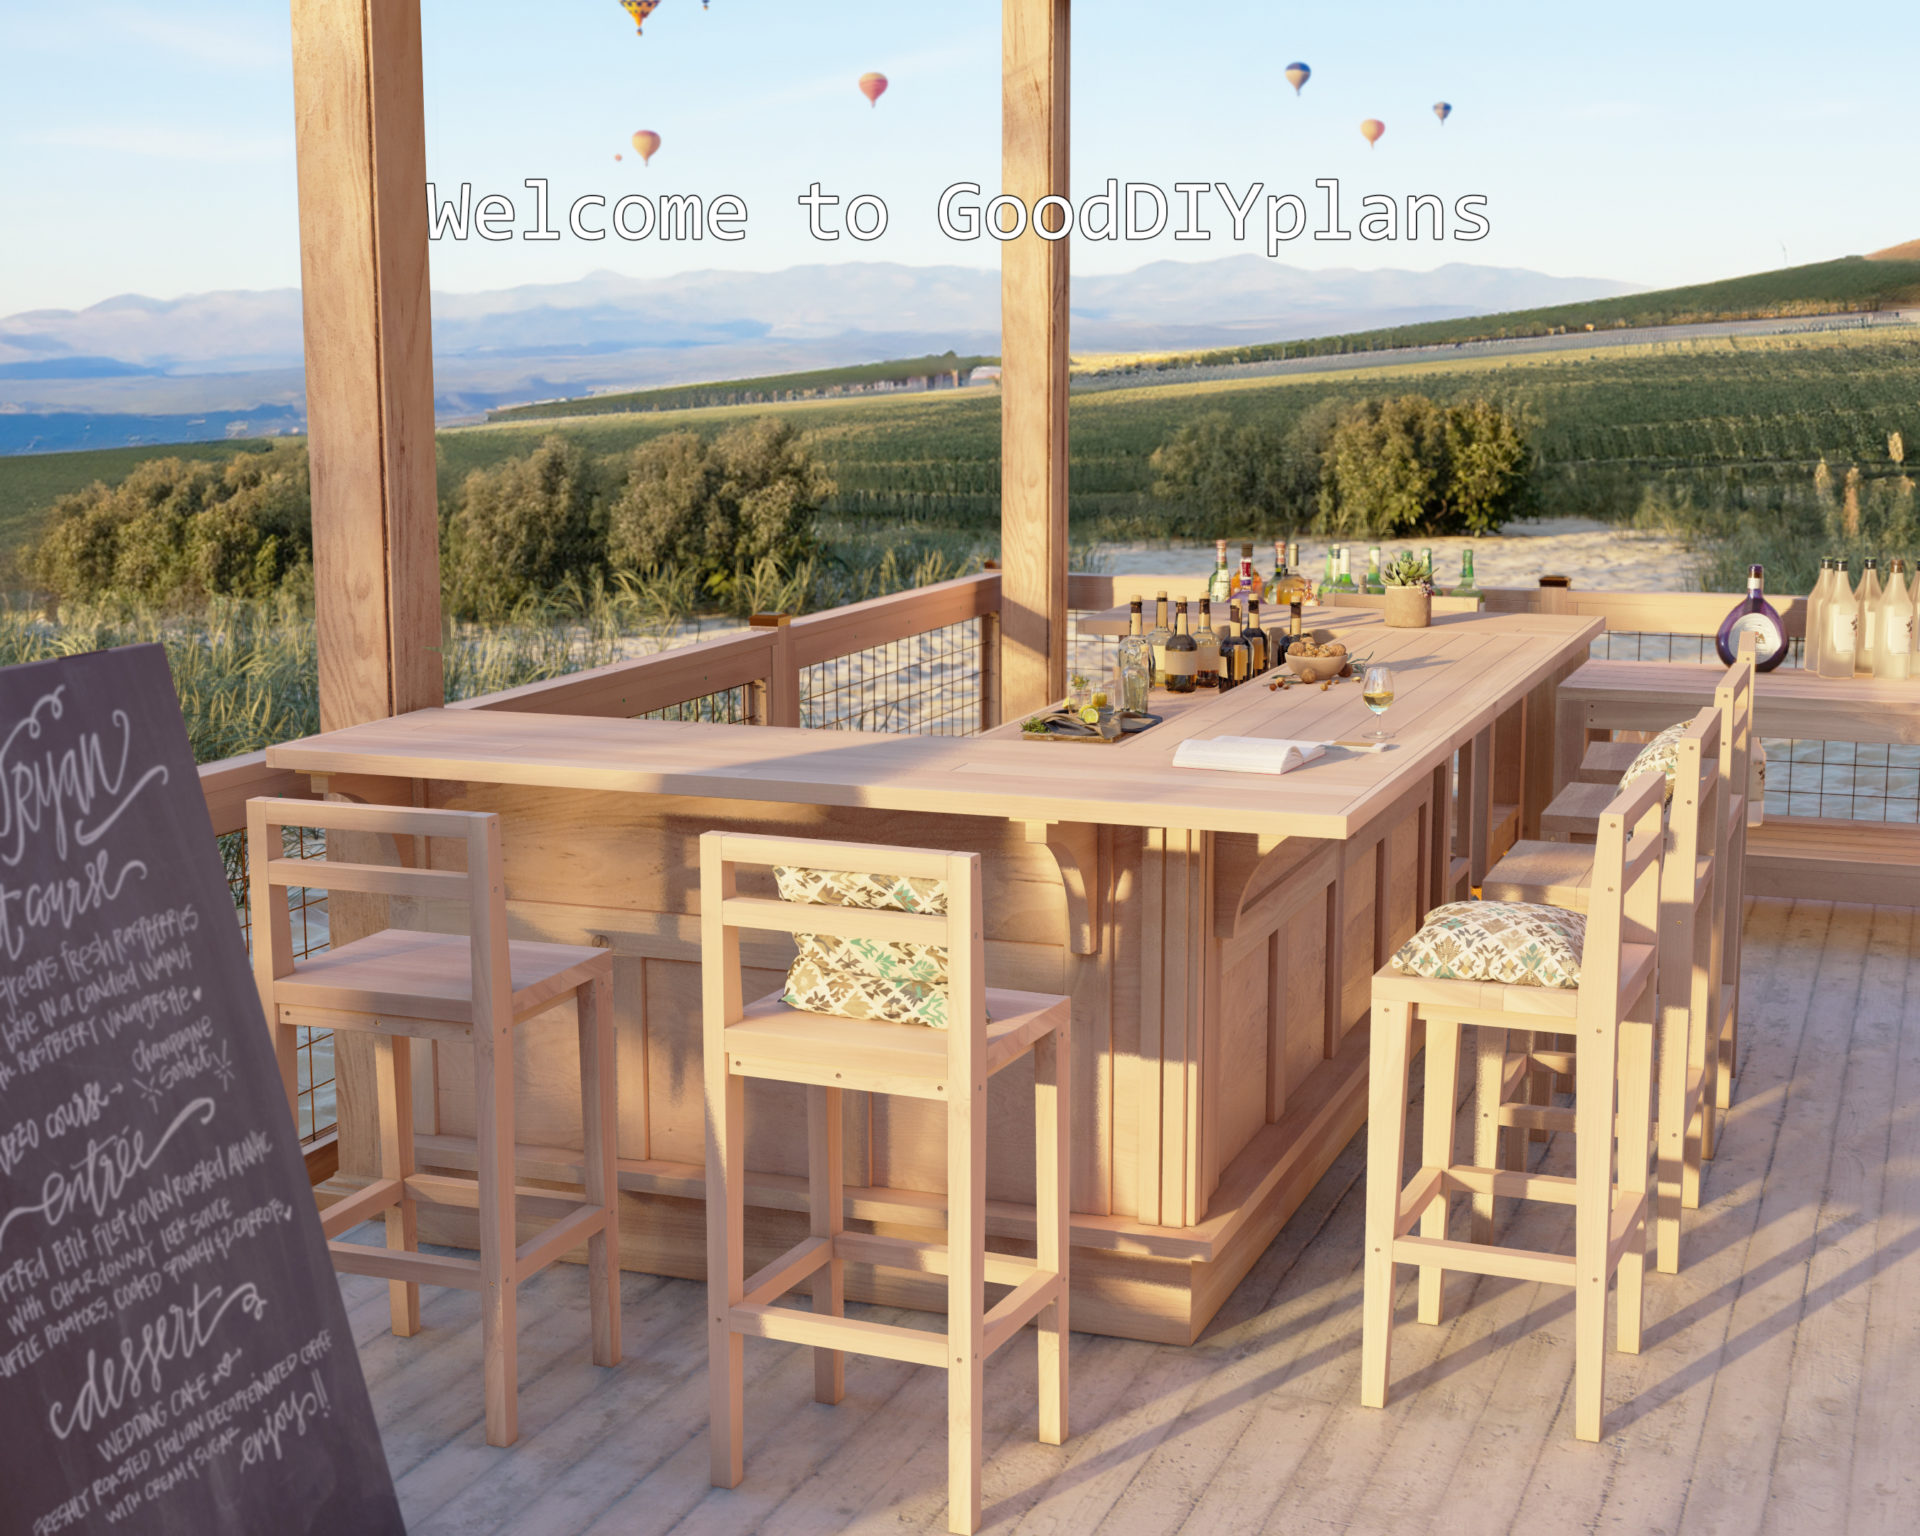 Outdoor bar set with a view of Napa Valley vineyards and distant hot air balloons.